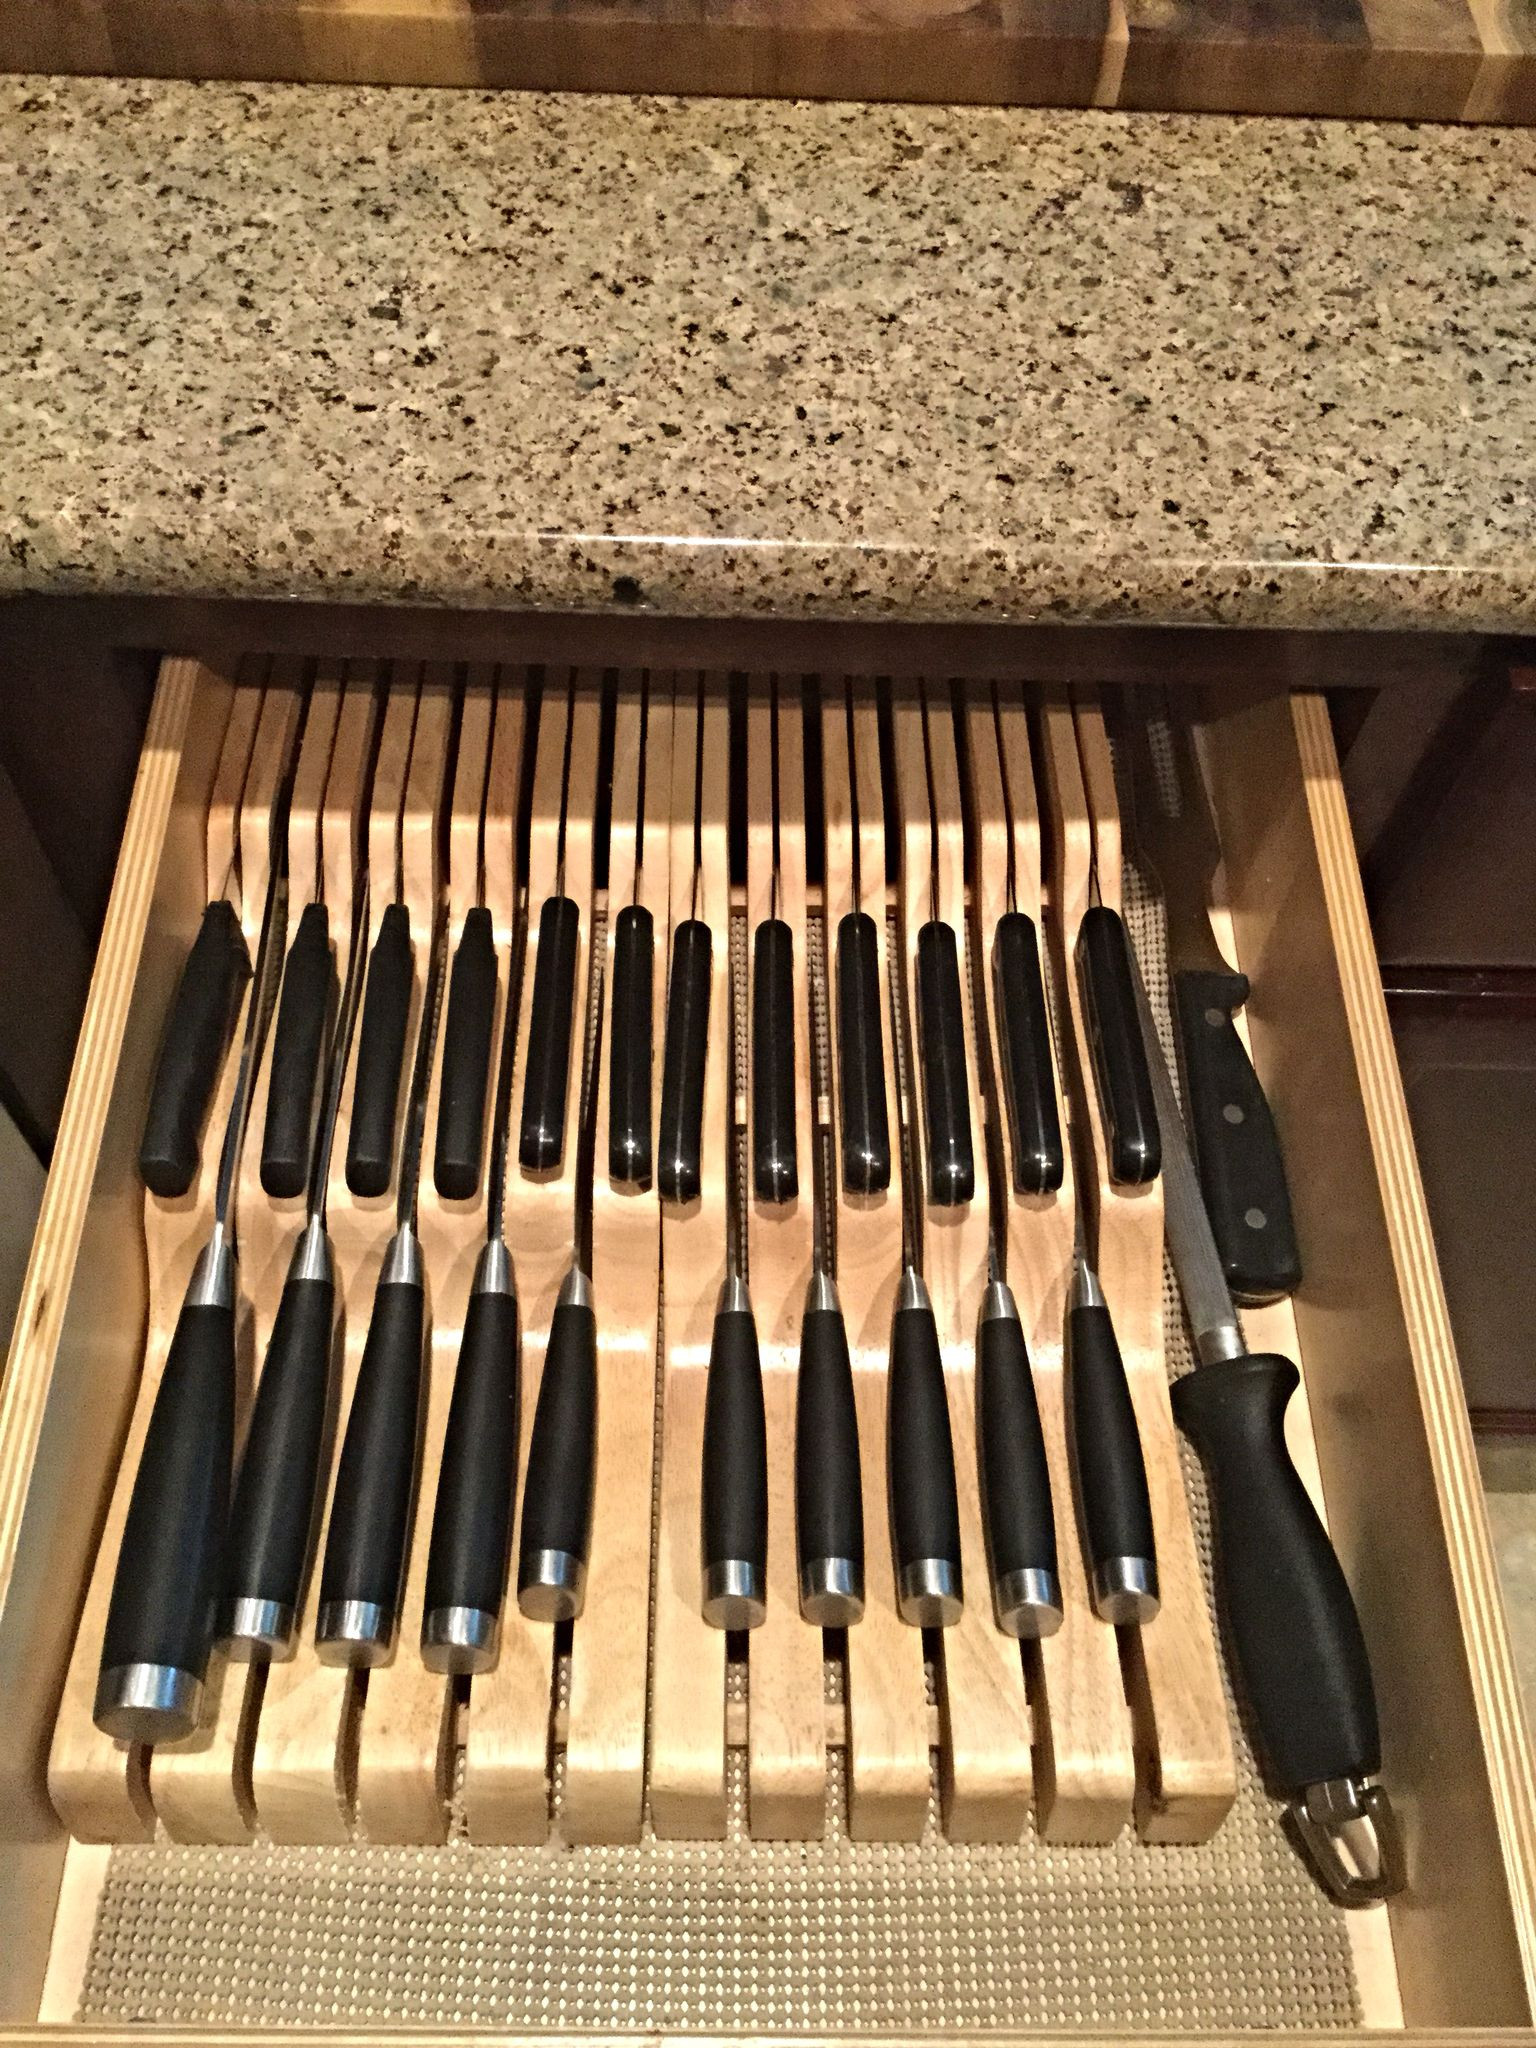 Target Kitchen Drawer Organizer
 These two knives organizers from Tar fit perfectly in a